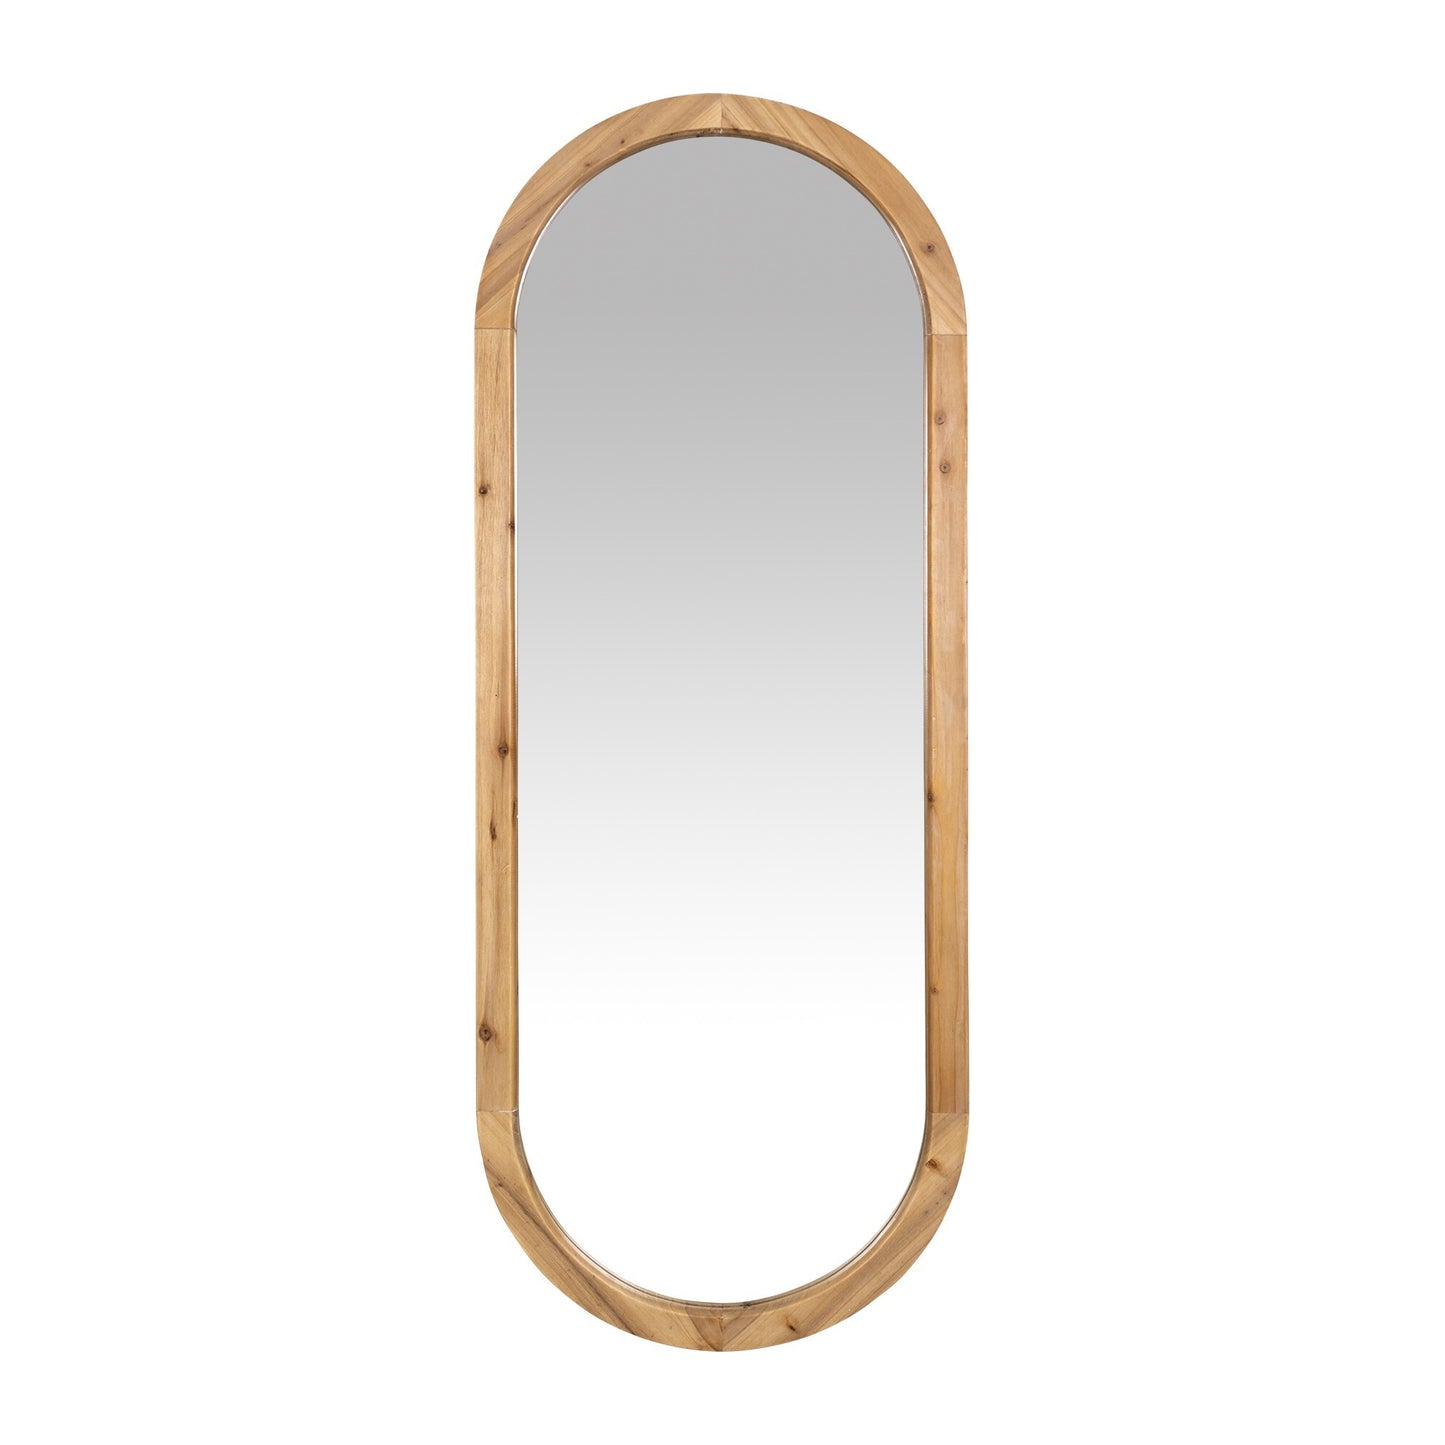 Oval Shaped Wooden Full Length Wall Mirror